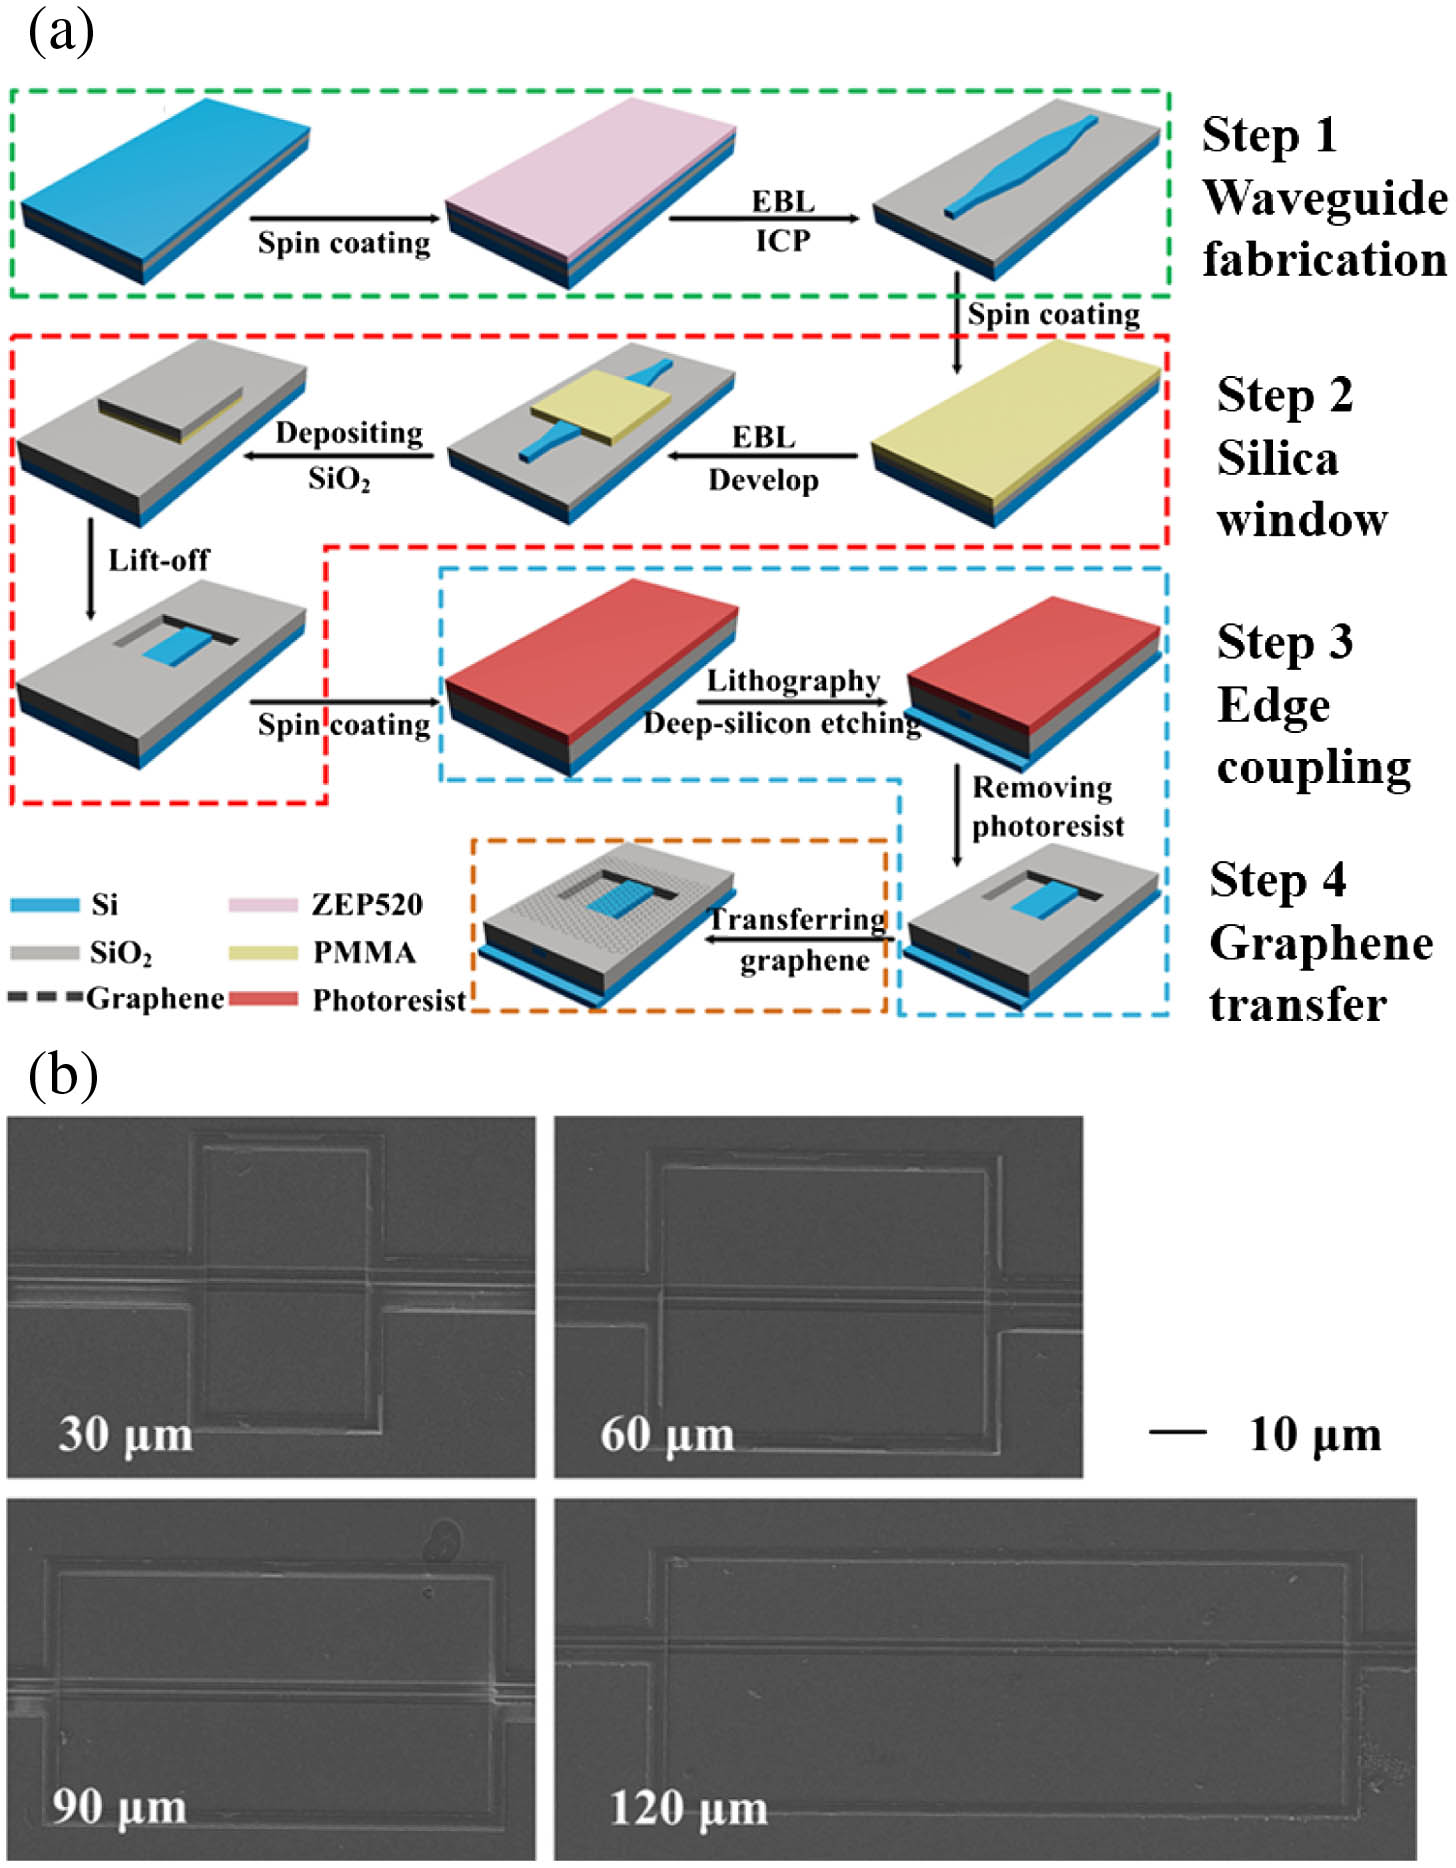 (a) Fabrication processes of the GOS waveguides; (b) SEM images of the GOS waveguides with different interaction lengths.